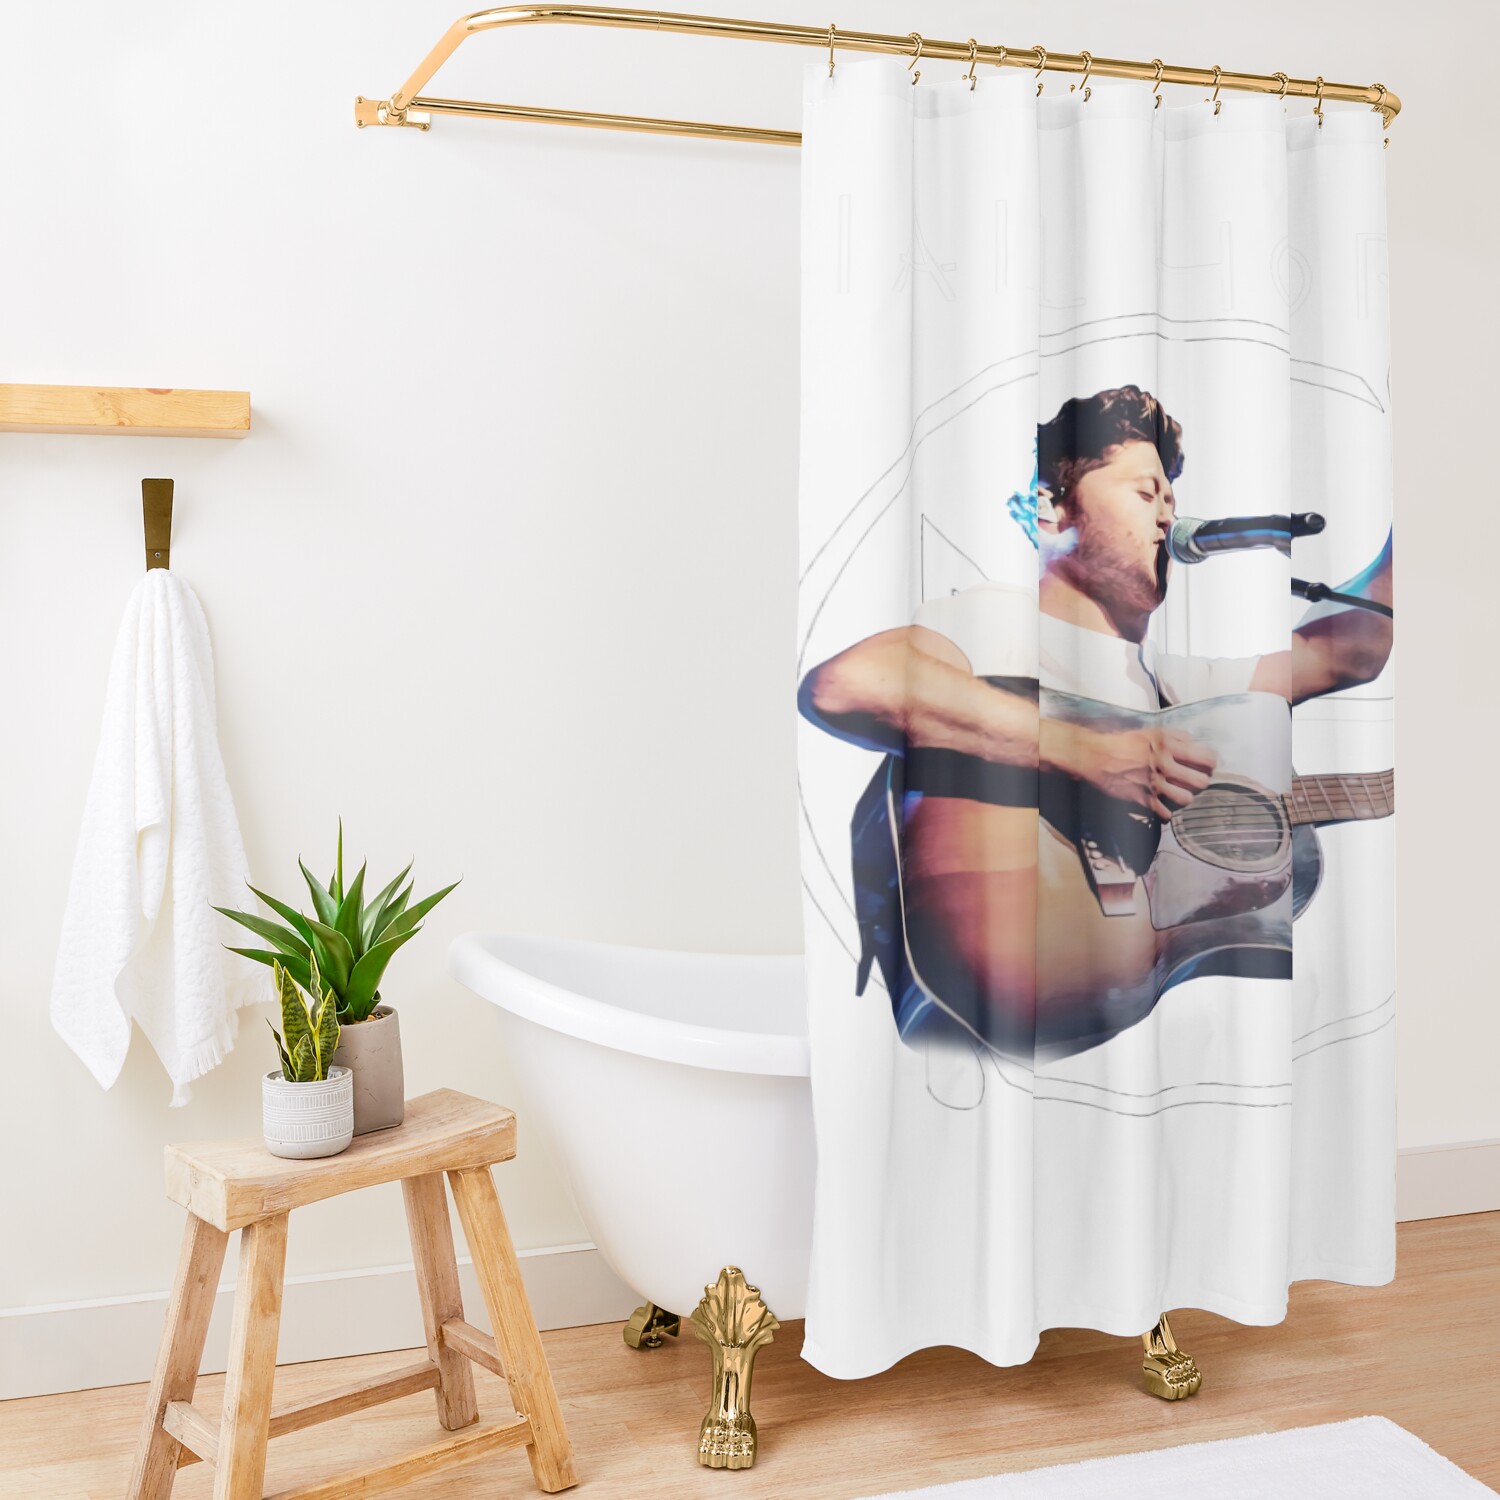 urshower curtain opensquare1500x1500 5 - Niall Horan Shop